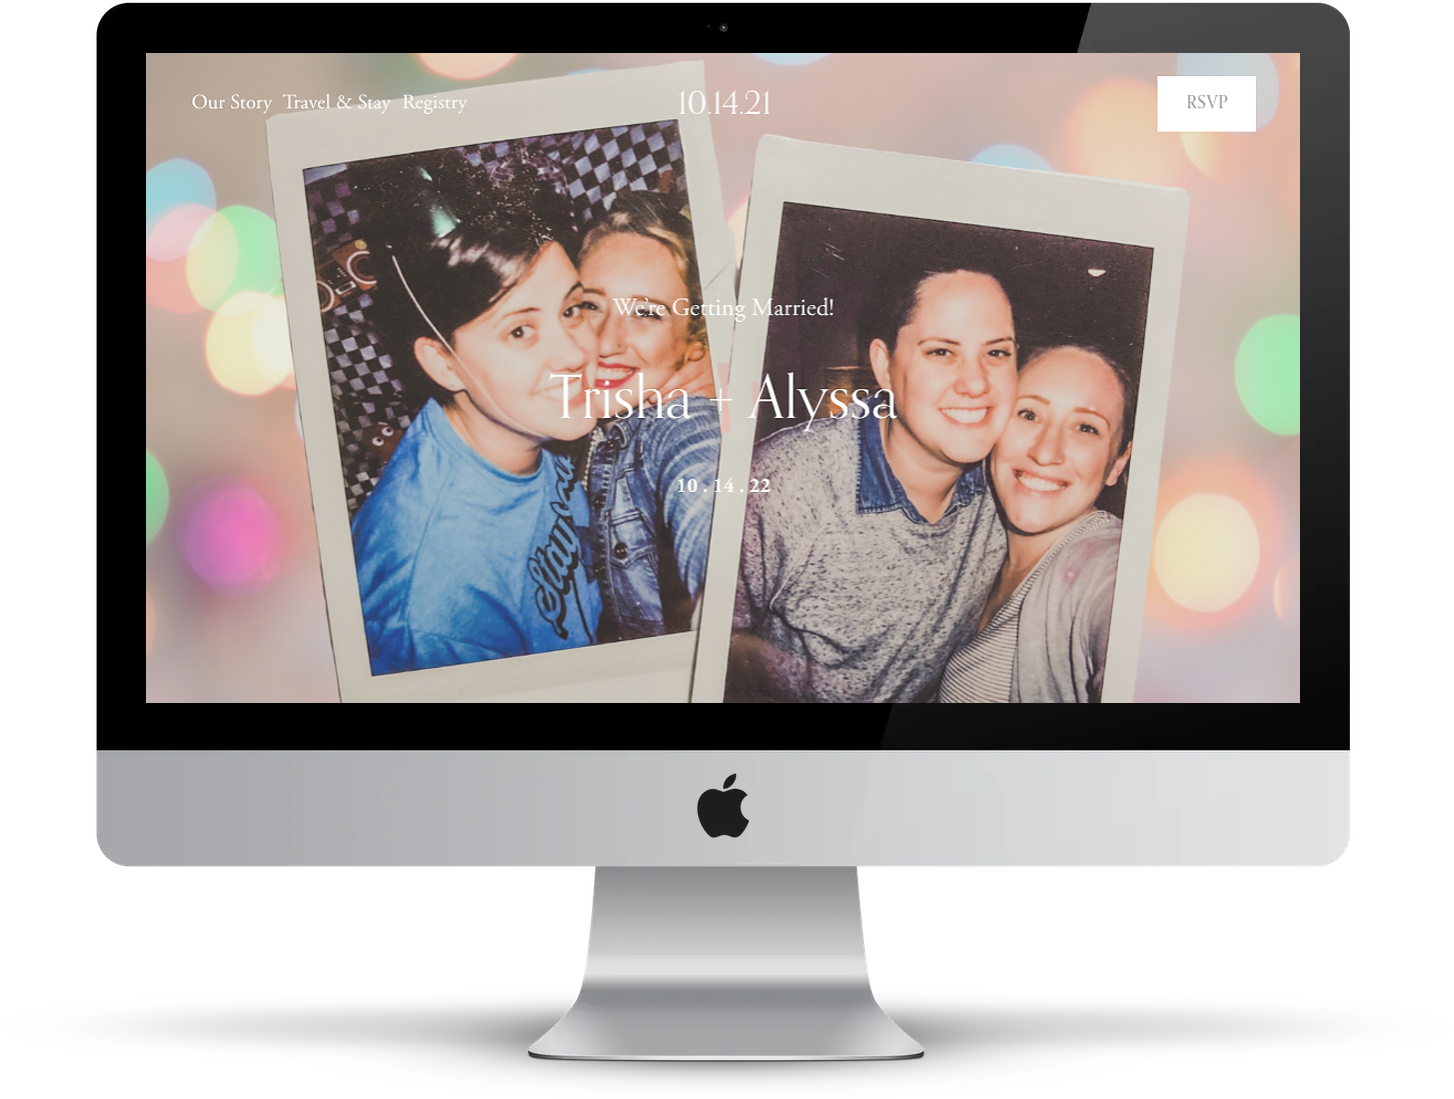 Computer screen displaying wedding website showing DIY engagment photo of vintage polaroid style photos of two women